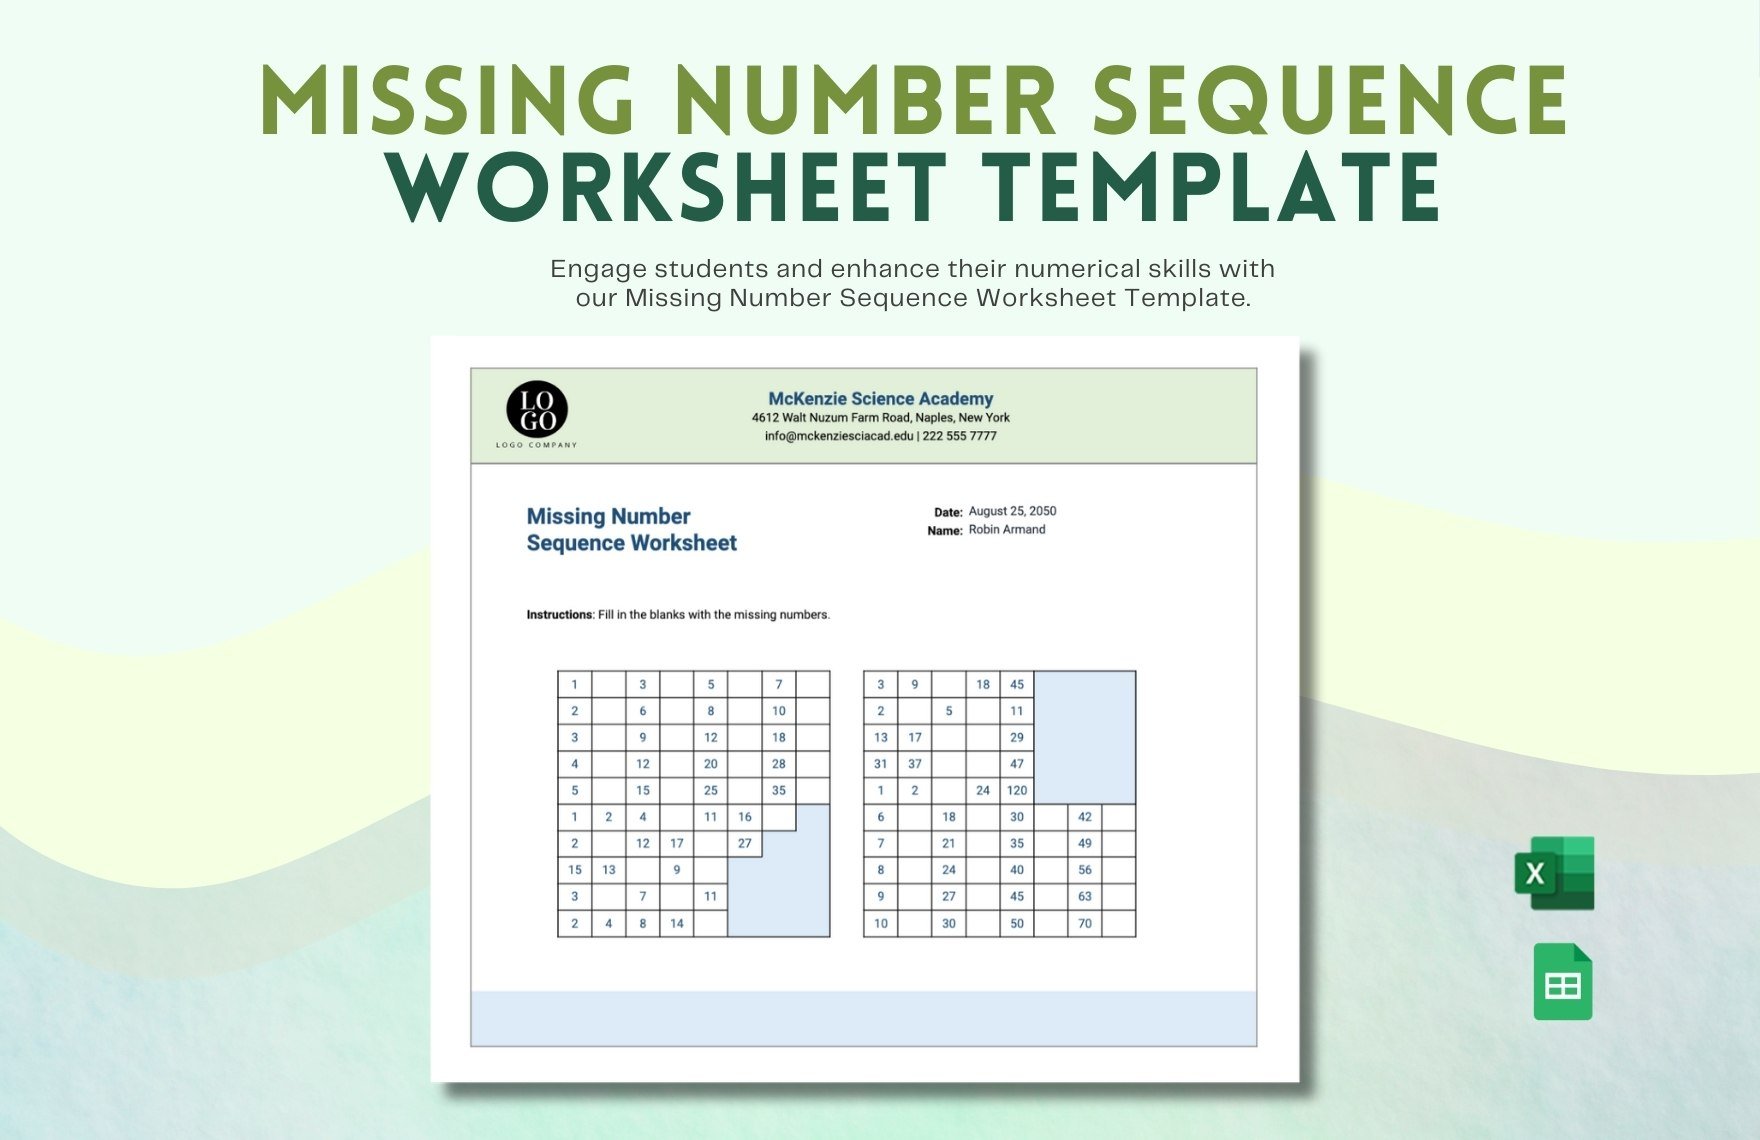 Missing Number Sequence Worksheet Template in Excel, Google Sheets